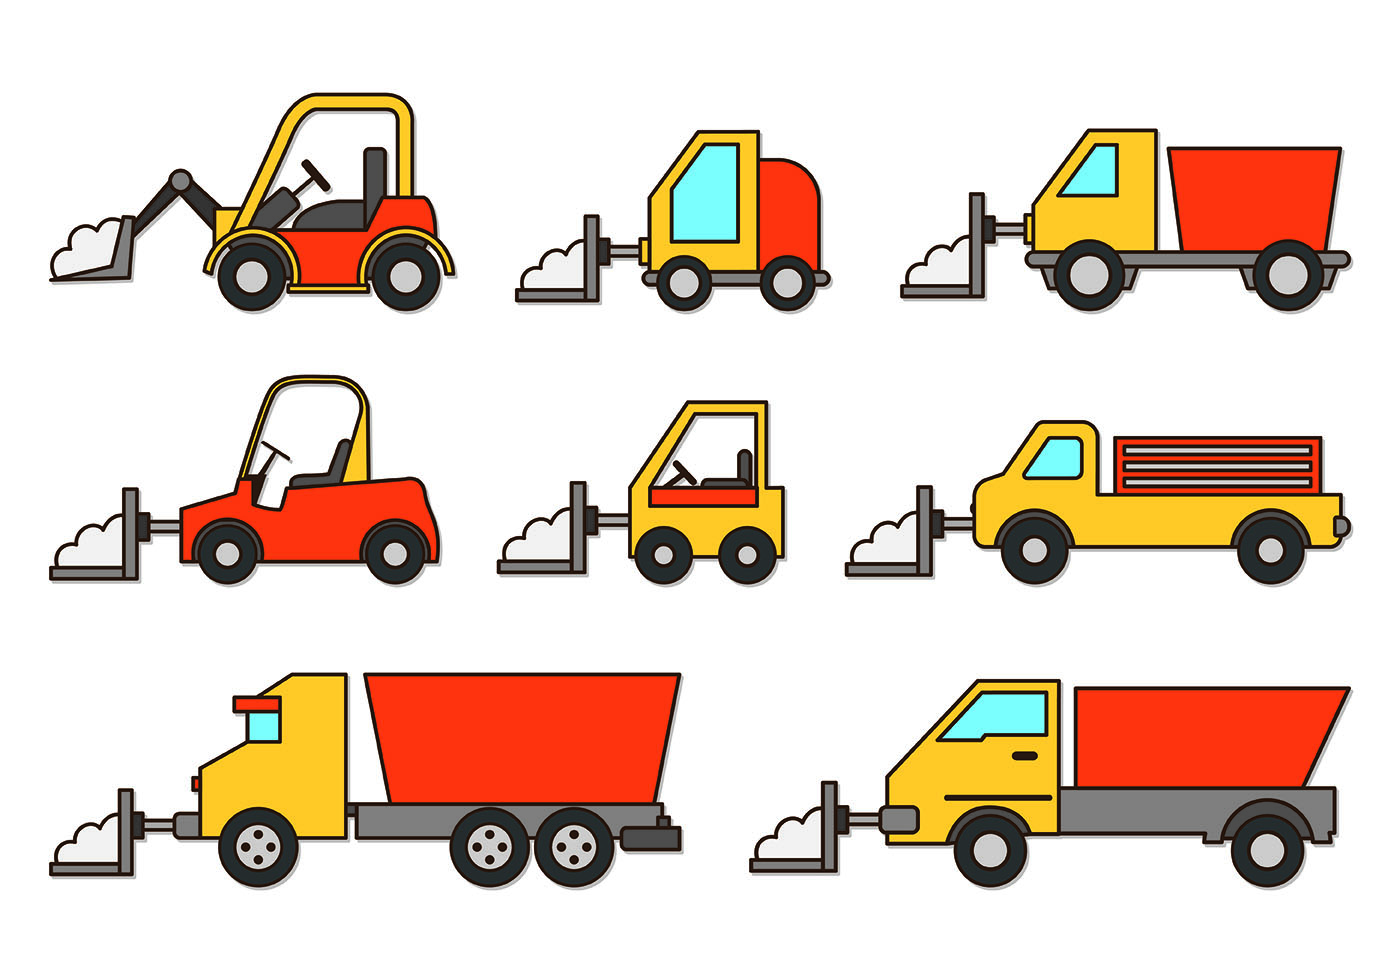 Download Set Of Snow Blower Icons - Download Free Vectors, Clipart ...